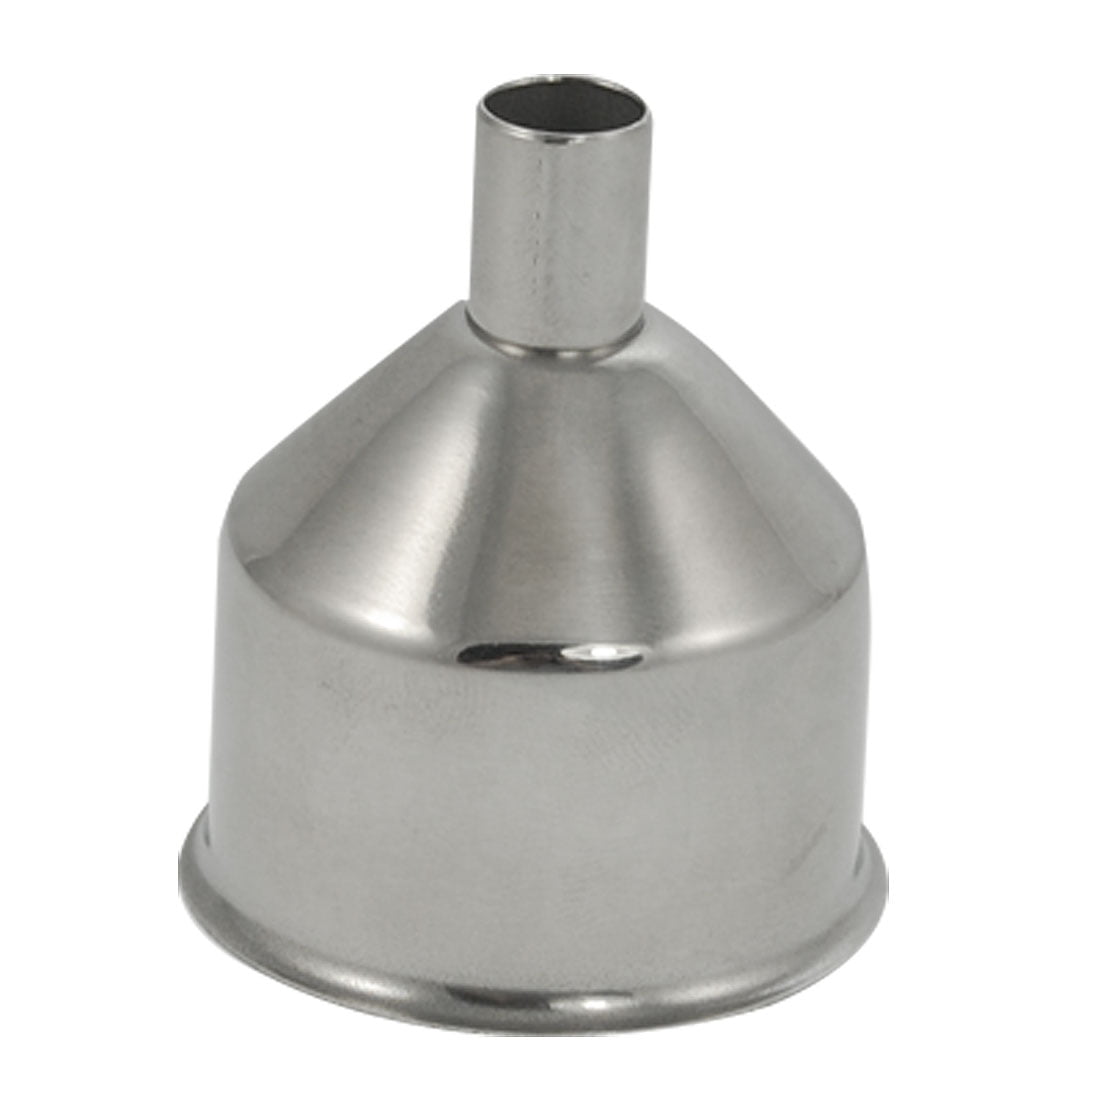 Details about   Stainless Steel Funnel Set 3 Pc Laser 7099 